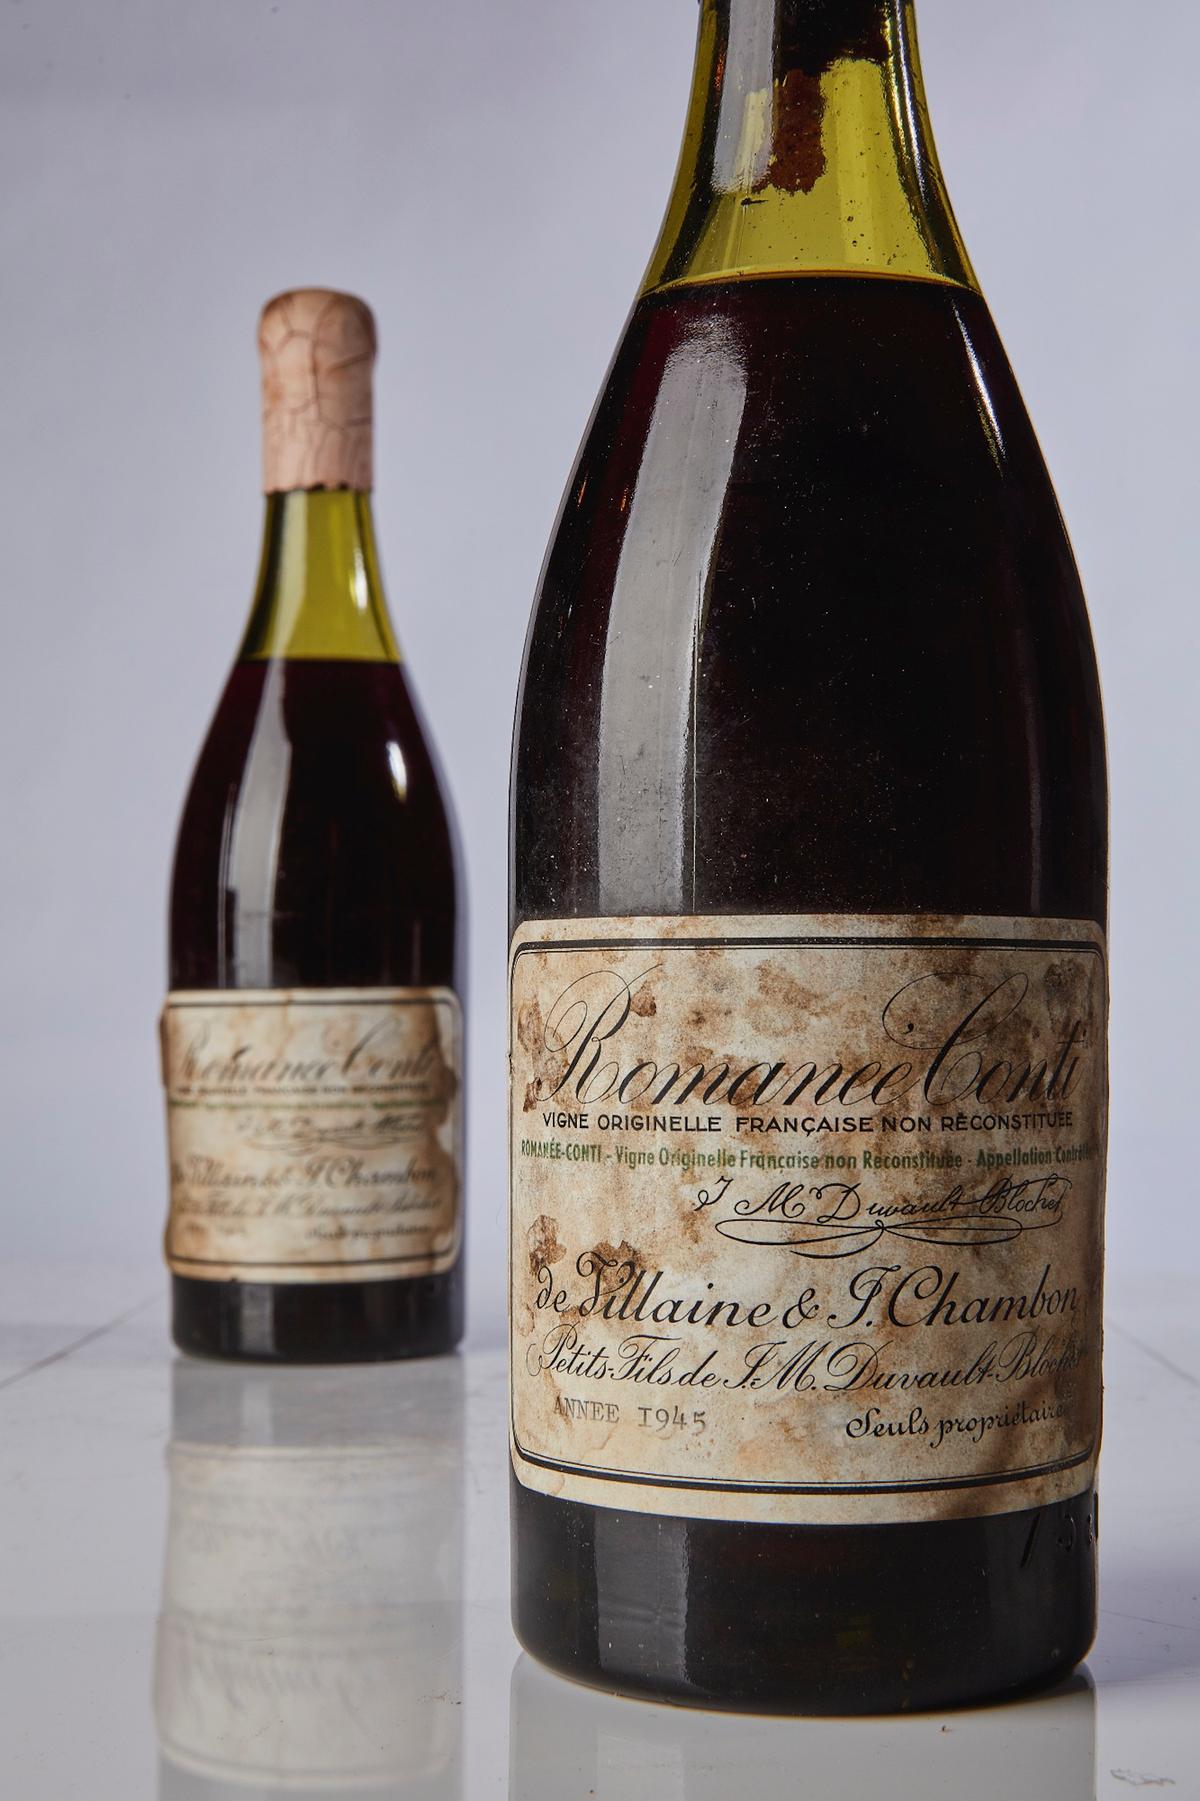 This bottle of Romanée-Conti from 1945 fetched a tidy $558,000 when offered at an auction by Sotheby’s. (Courtesy of Sotheby's)